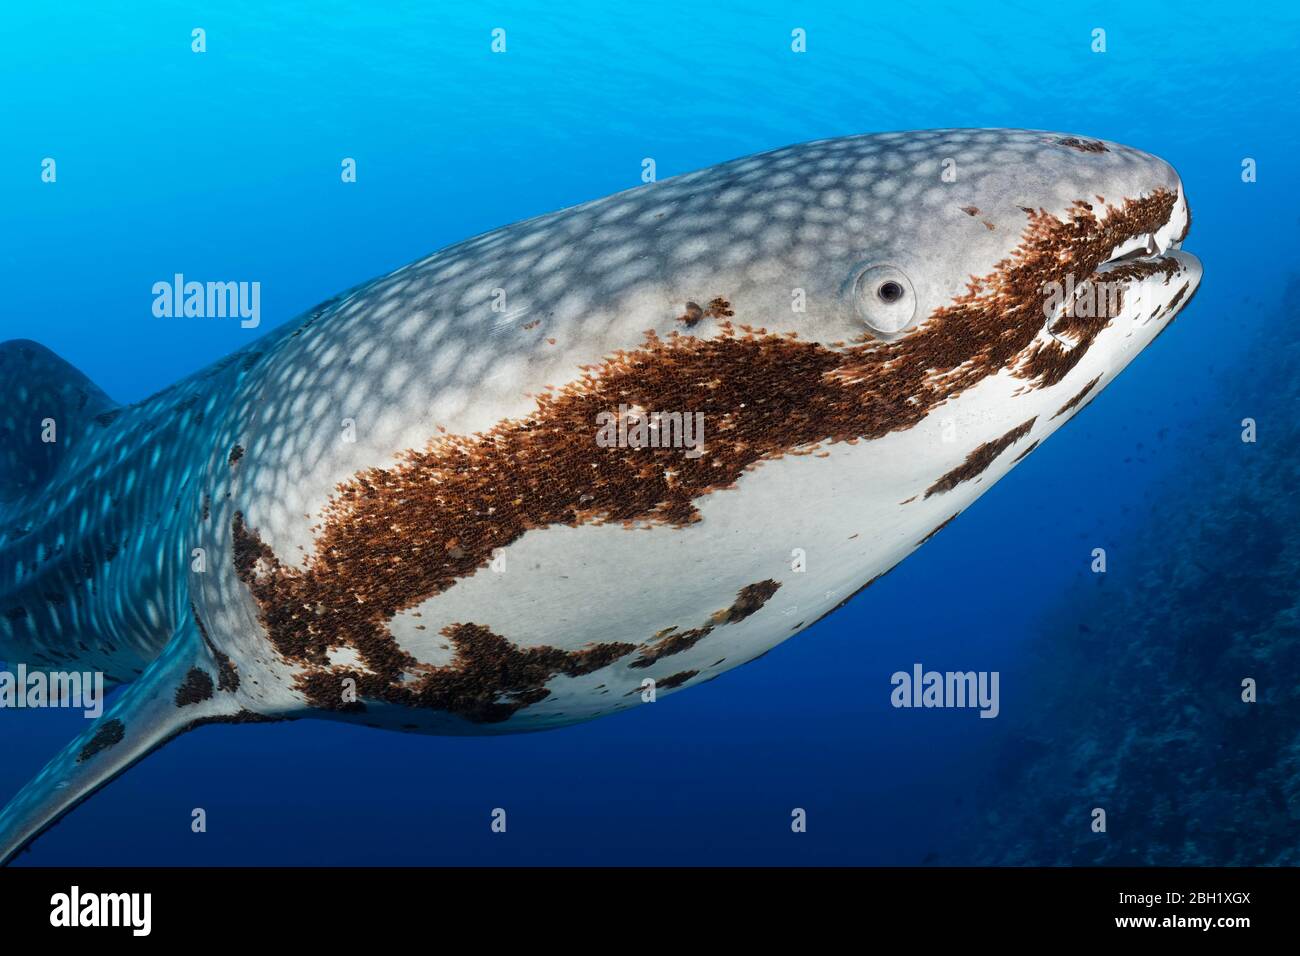 Whale shark (Rhincodon typus), in blue water, with heavy infestation of parasitic ruddy crayfish (Pandarus rhincodonicus), close-up, Pacific Ocean Stock Photo